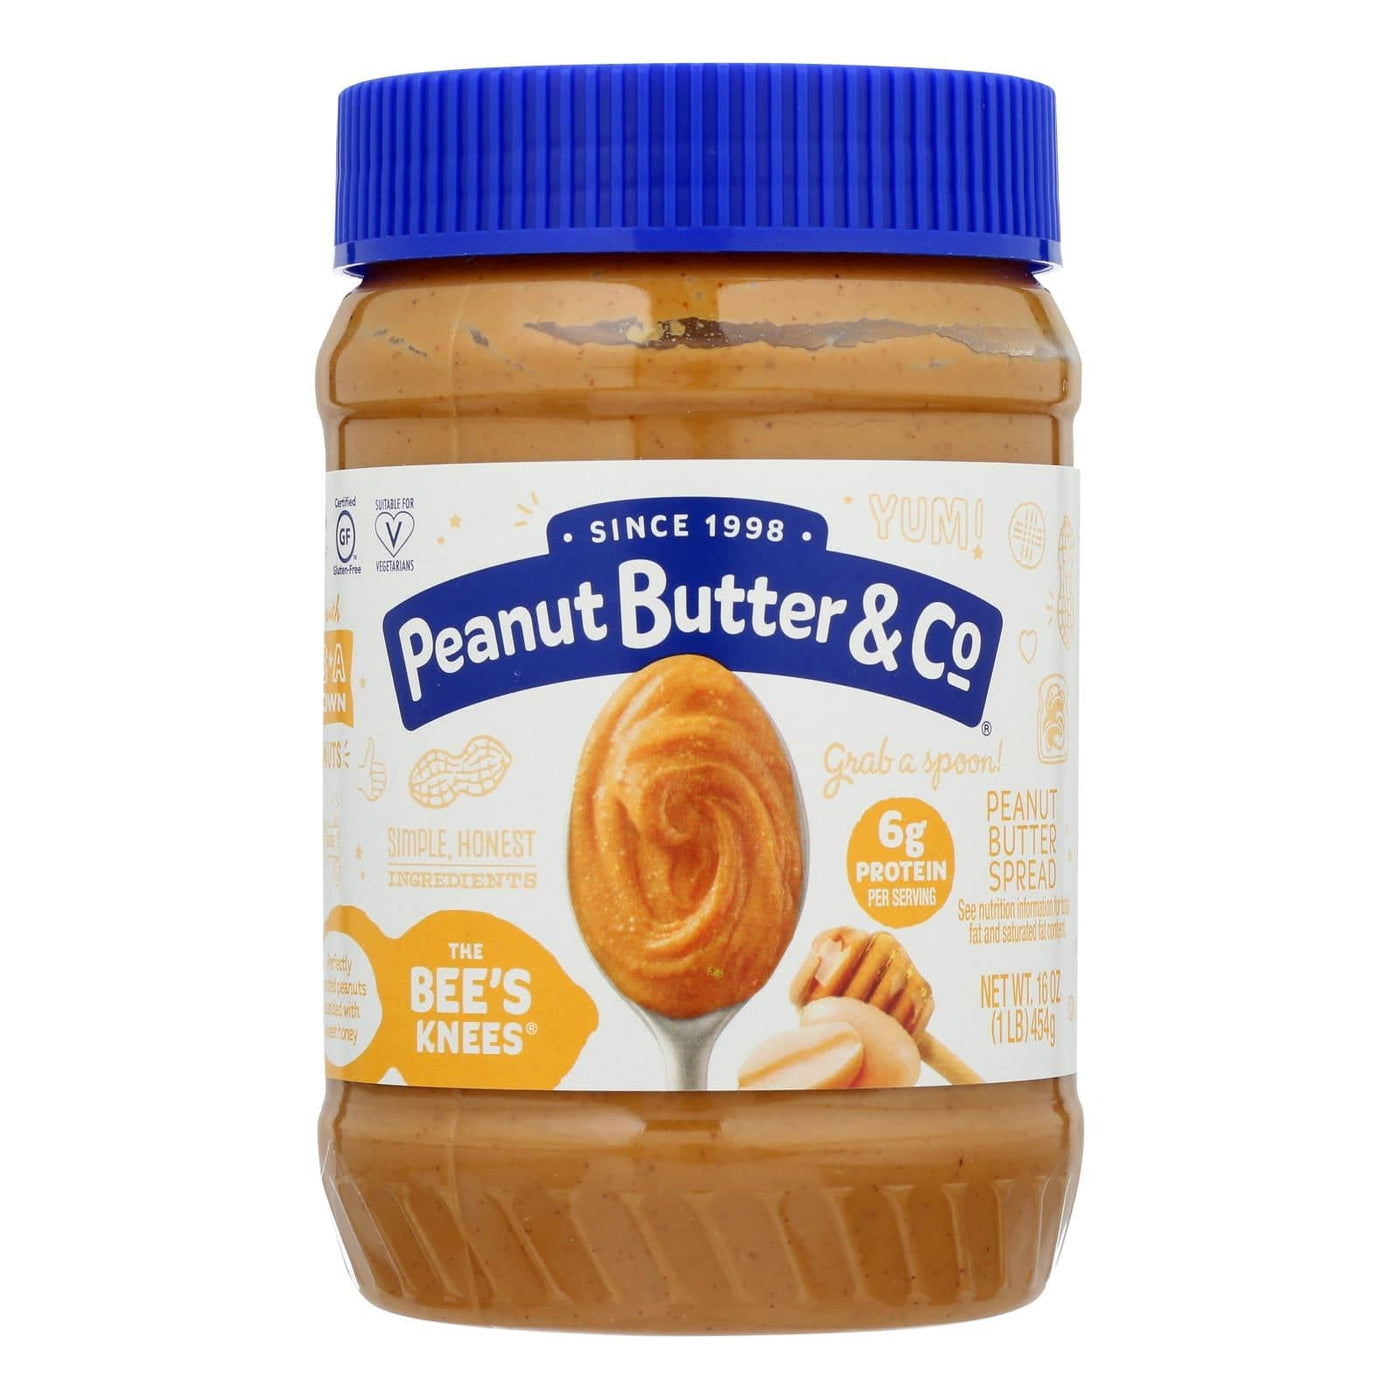 Buy Peanut Butter And Co The Bee's Knees - Peanut Butter - Case Of 6 - 16 Oz.  at OnlyNaturals.us